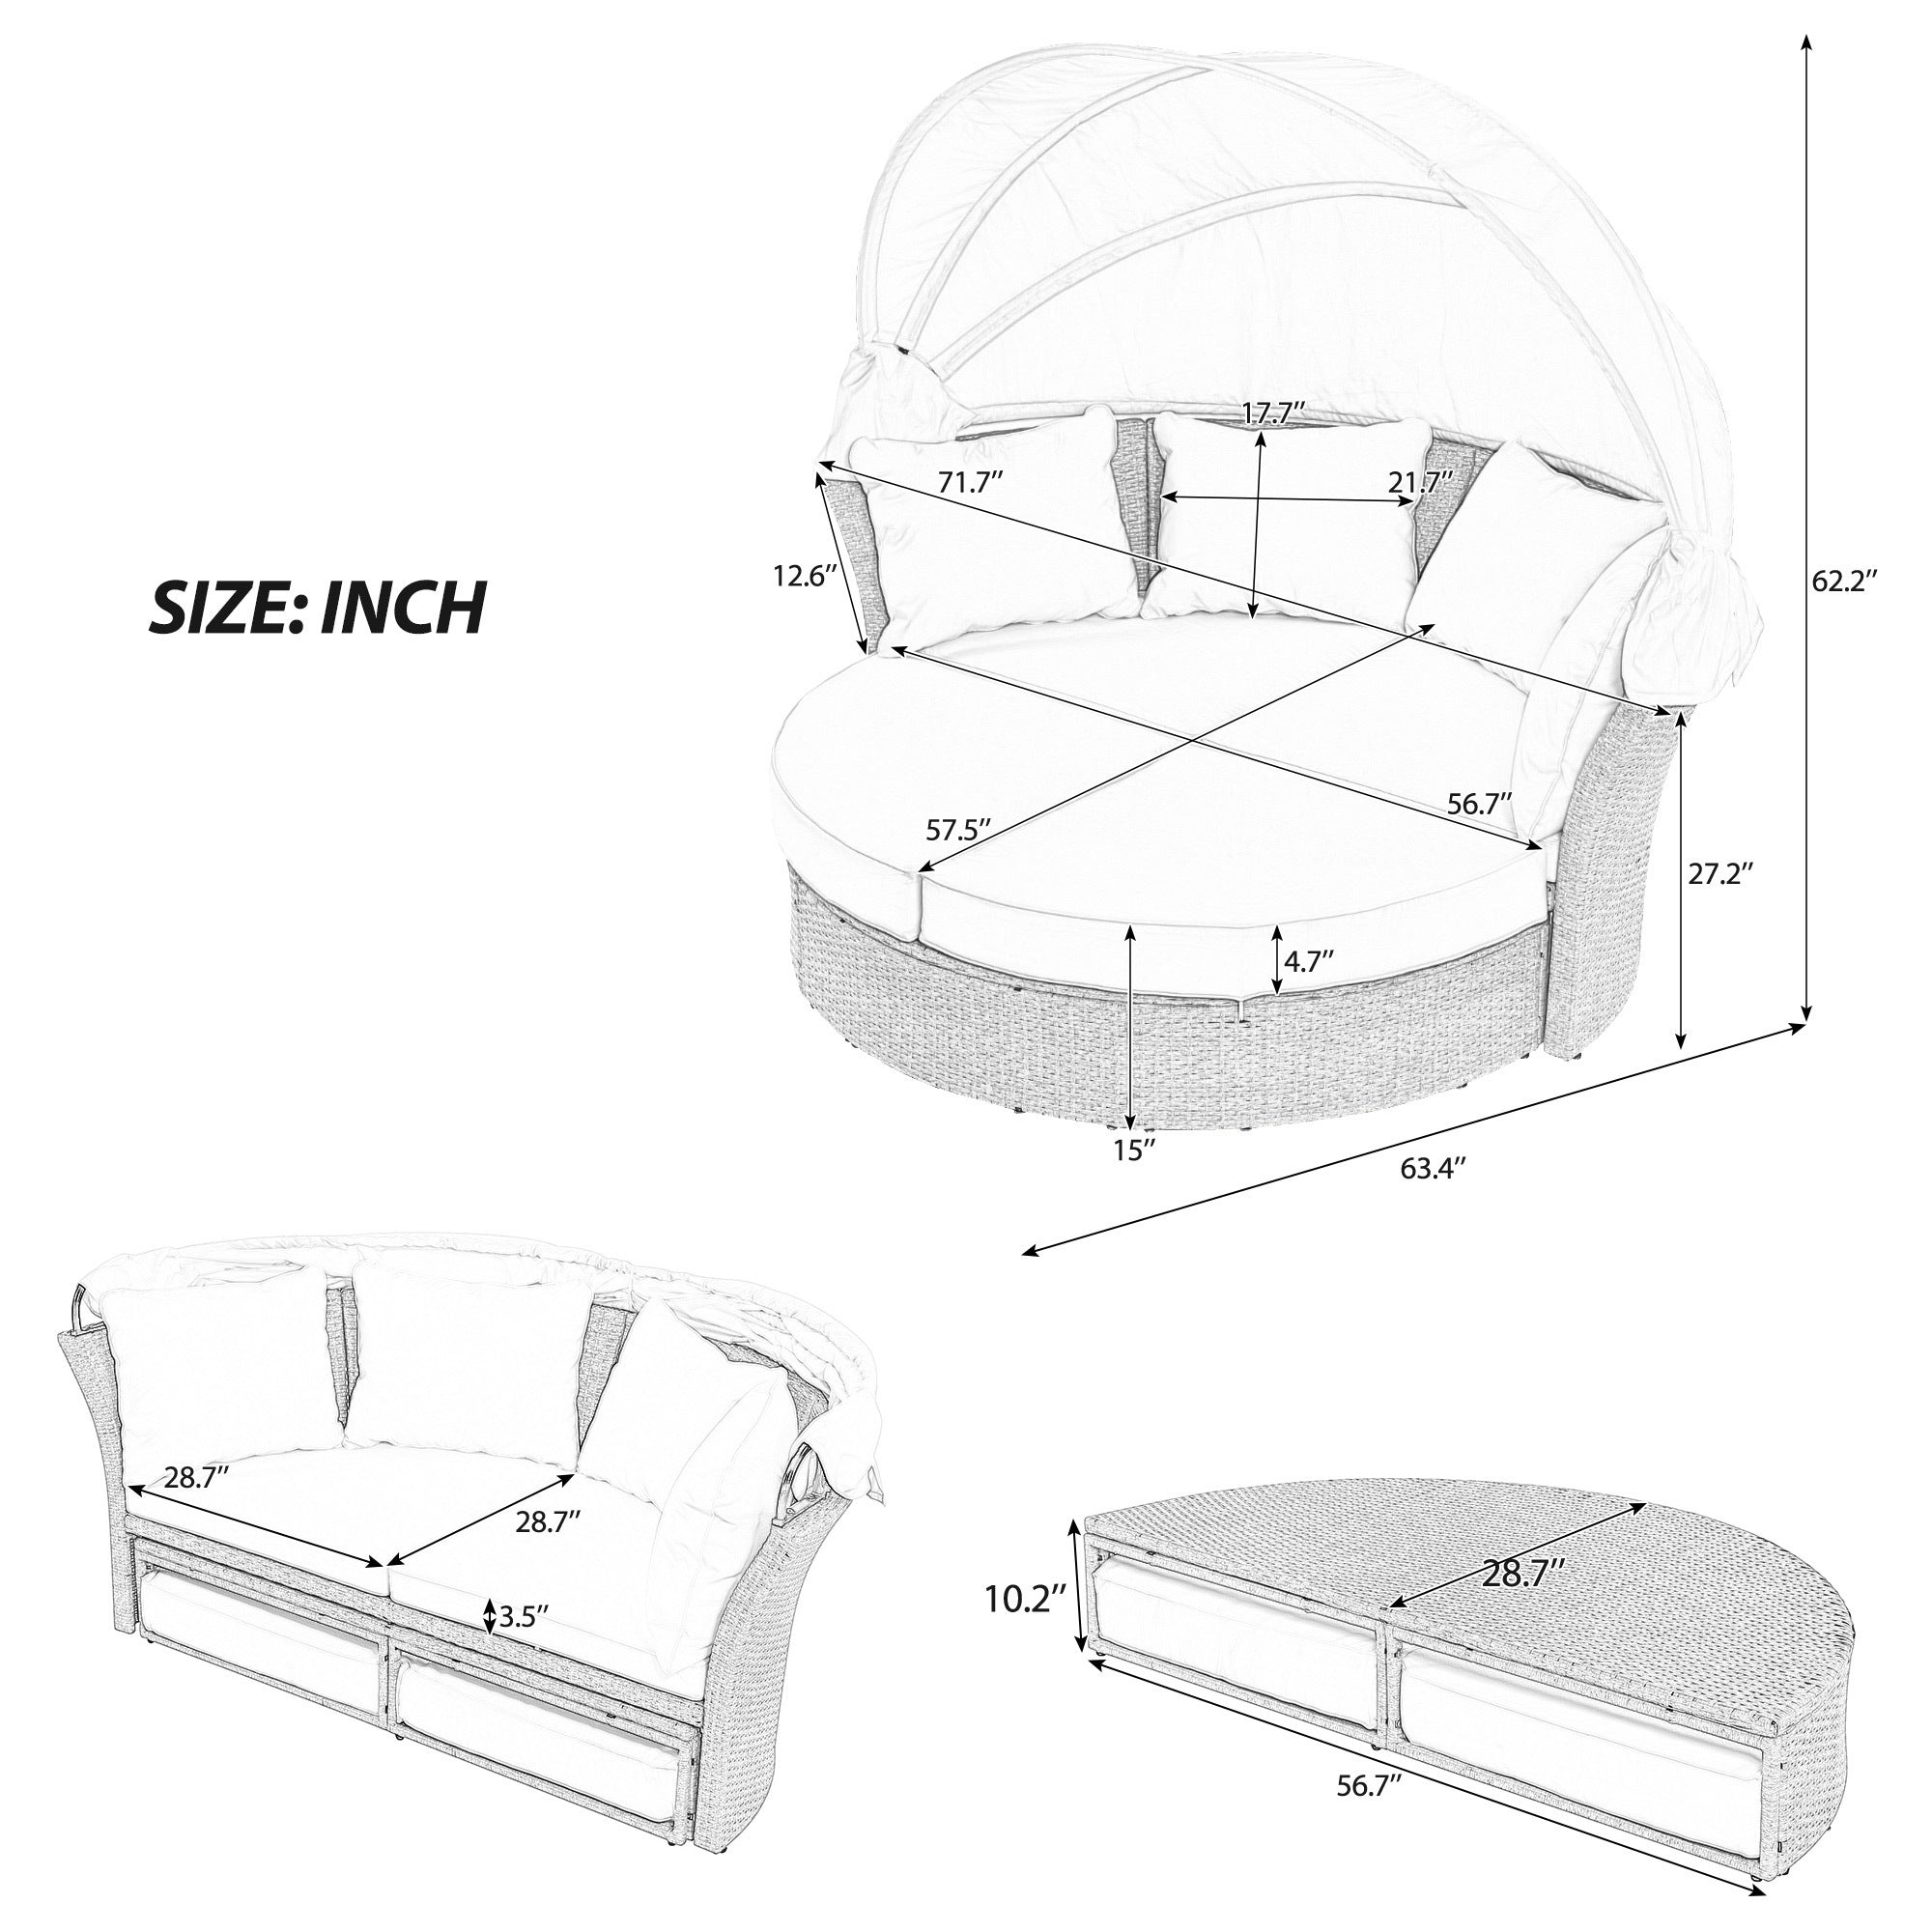 Convertible Patio Daybed